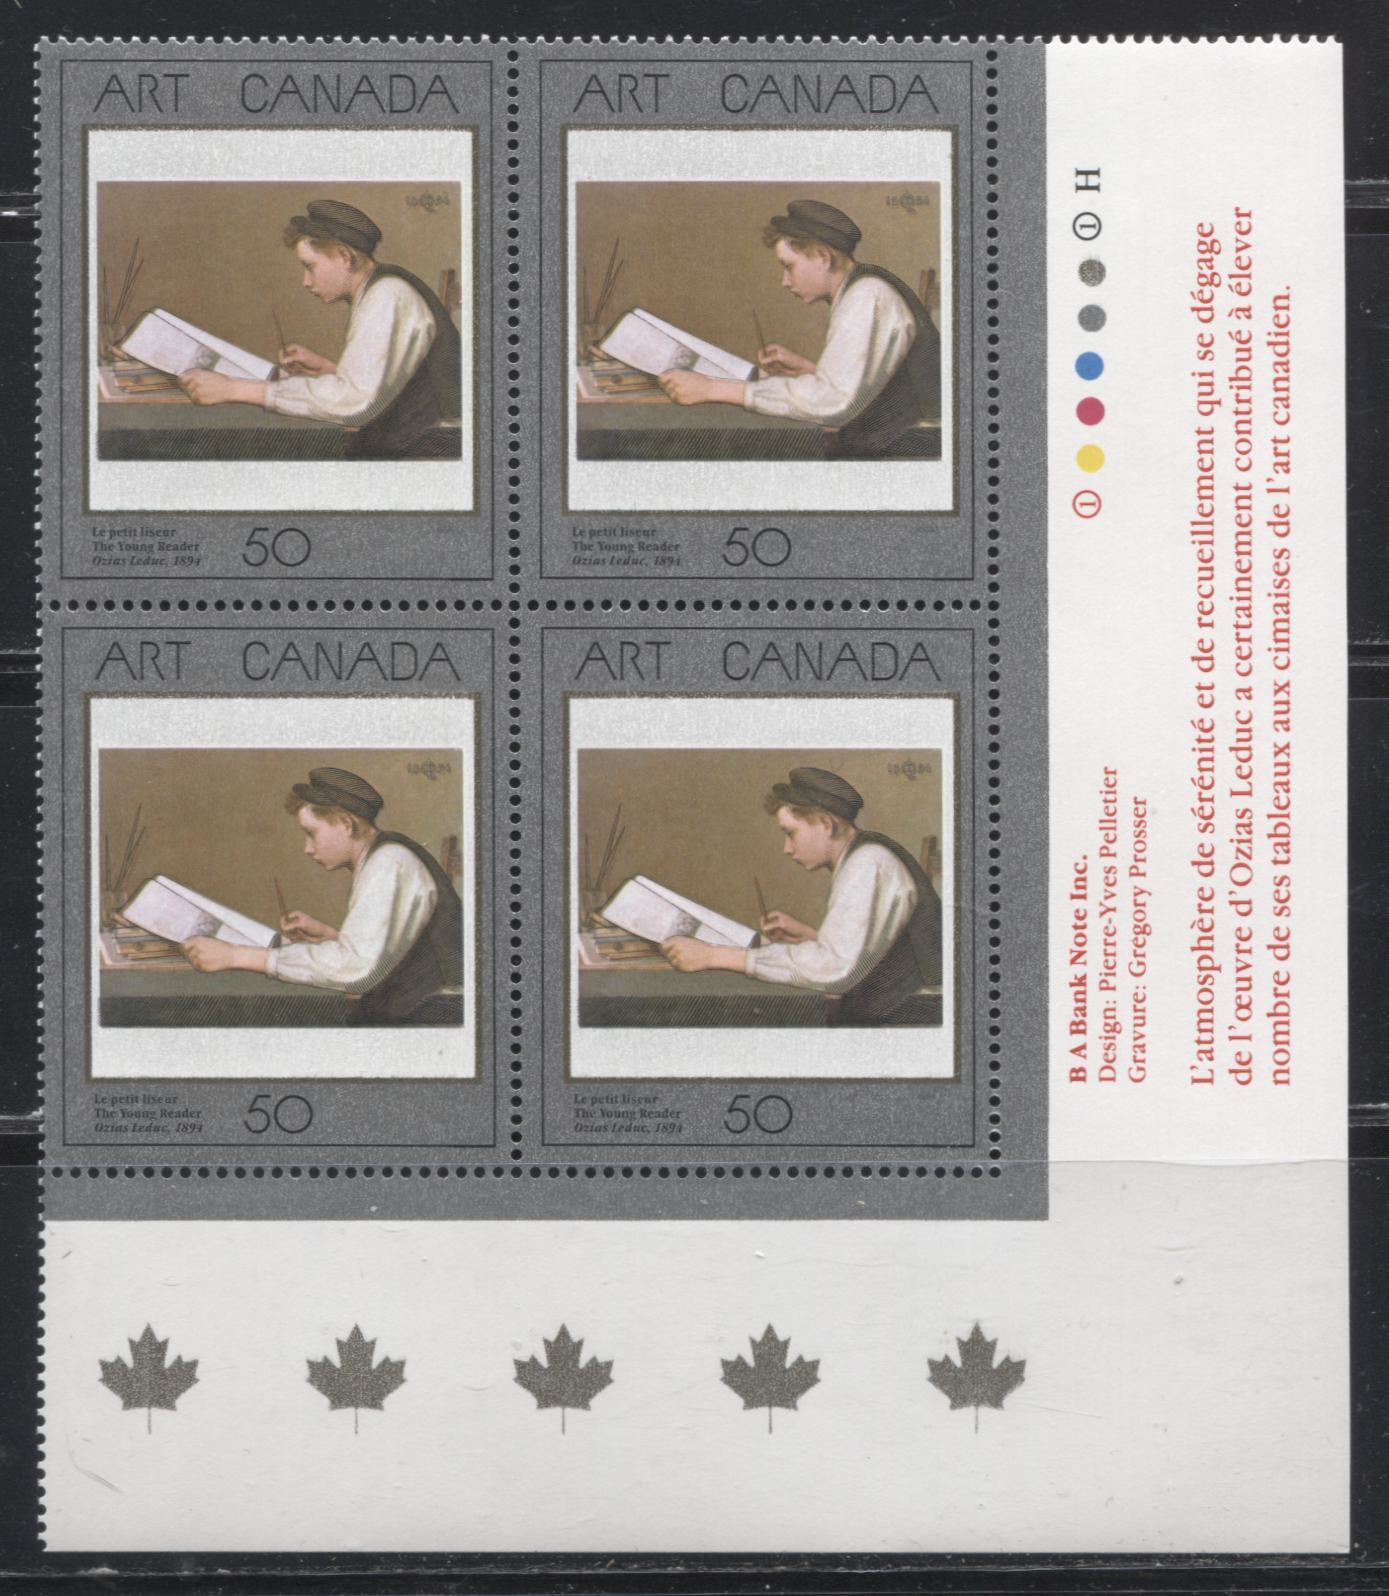 Lot 141 Canada #1203i 50c Multicoloured The Young Reader 1988 Art Canada Issue, A VFNH LR Plate Block on the Scarce Low Fluorescent Paper